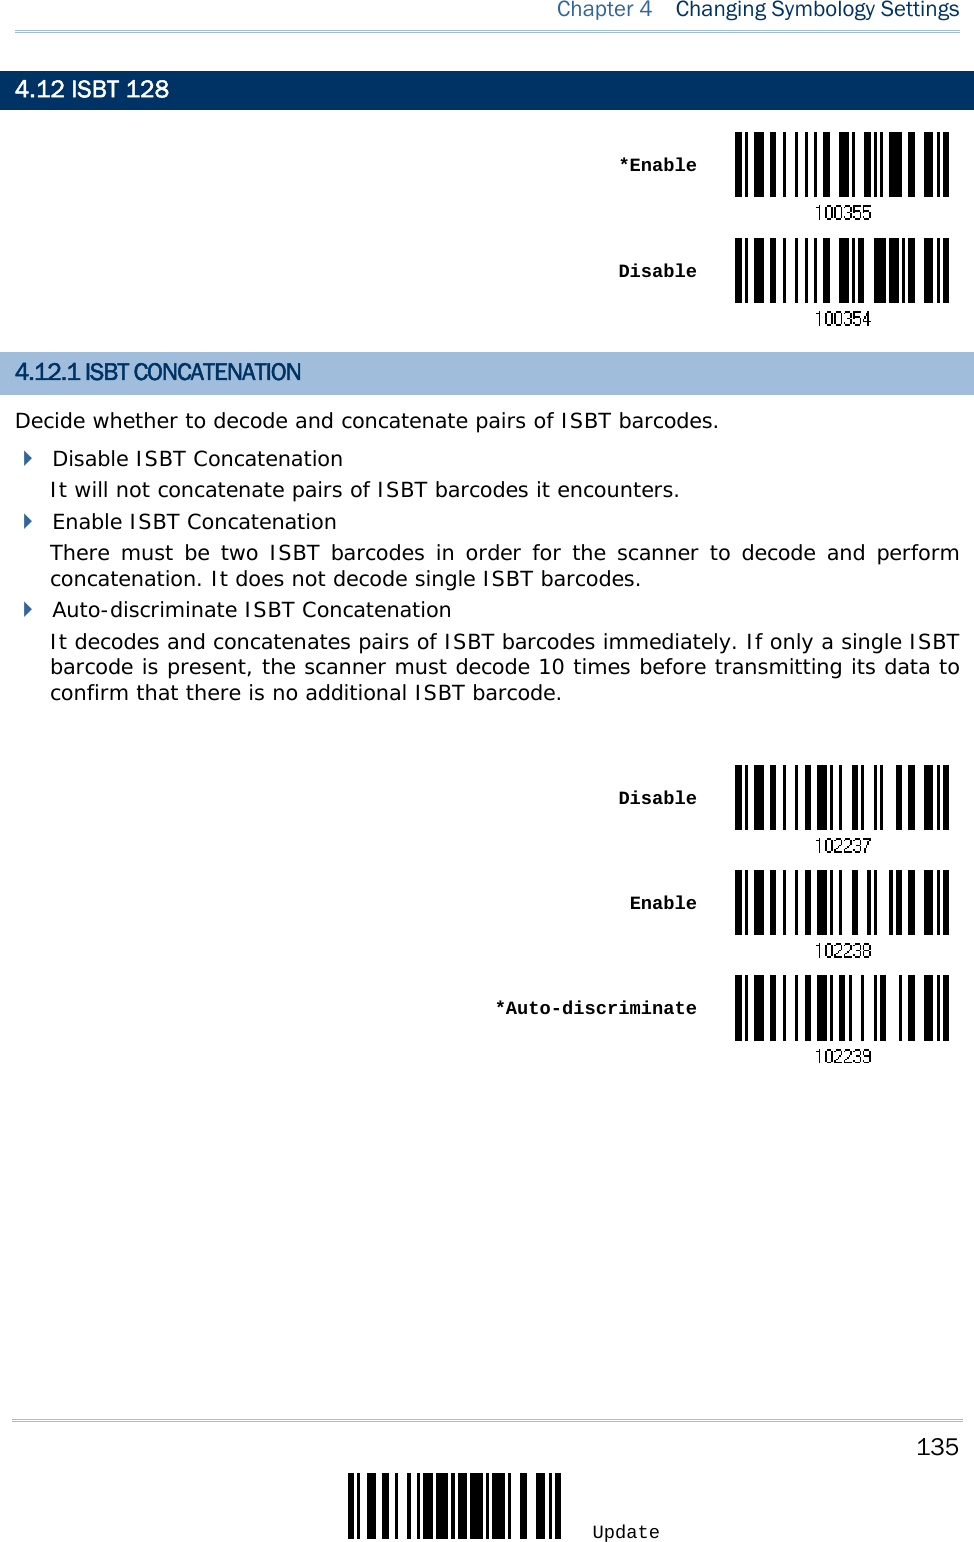     135 Update  Chapter 4  Changing Symbology Settings 4.12 ISBT 128  *Enable Disable4.12.1 ISBT CONCATENATION Decide whether to decode and concatenate pairs of ISBT barcodes.  Disable ISBT Concatenation It will not concatenate pairs of ISBT barcodes it encounters.  Enable ISBT Concatenation There must be two ISBT barcodes in order for the scanner to decode and perform concatenation. It does not decode single ISBT barcodes.  Auto-discriminate ISBT Concatenation It decodes and concatenates pairs of ISBT barcodes immediately. If only a single ISBT barcode is present, the scanner must decode 10 times before transmitting its data to confirm that there is no additional ISBT barcode.   Disable Enable *Auto-discriminate       